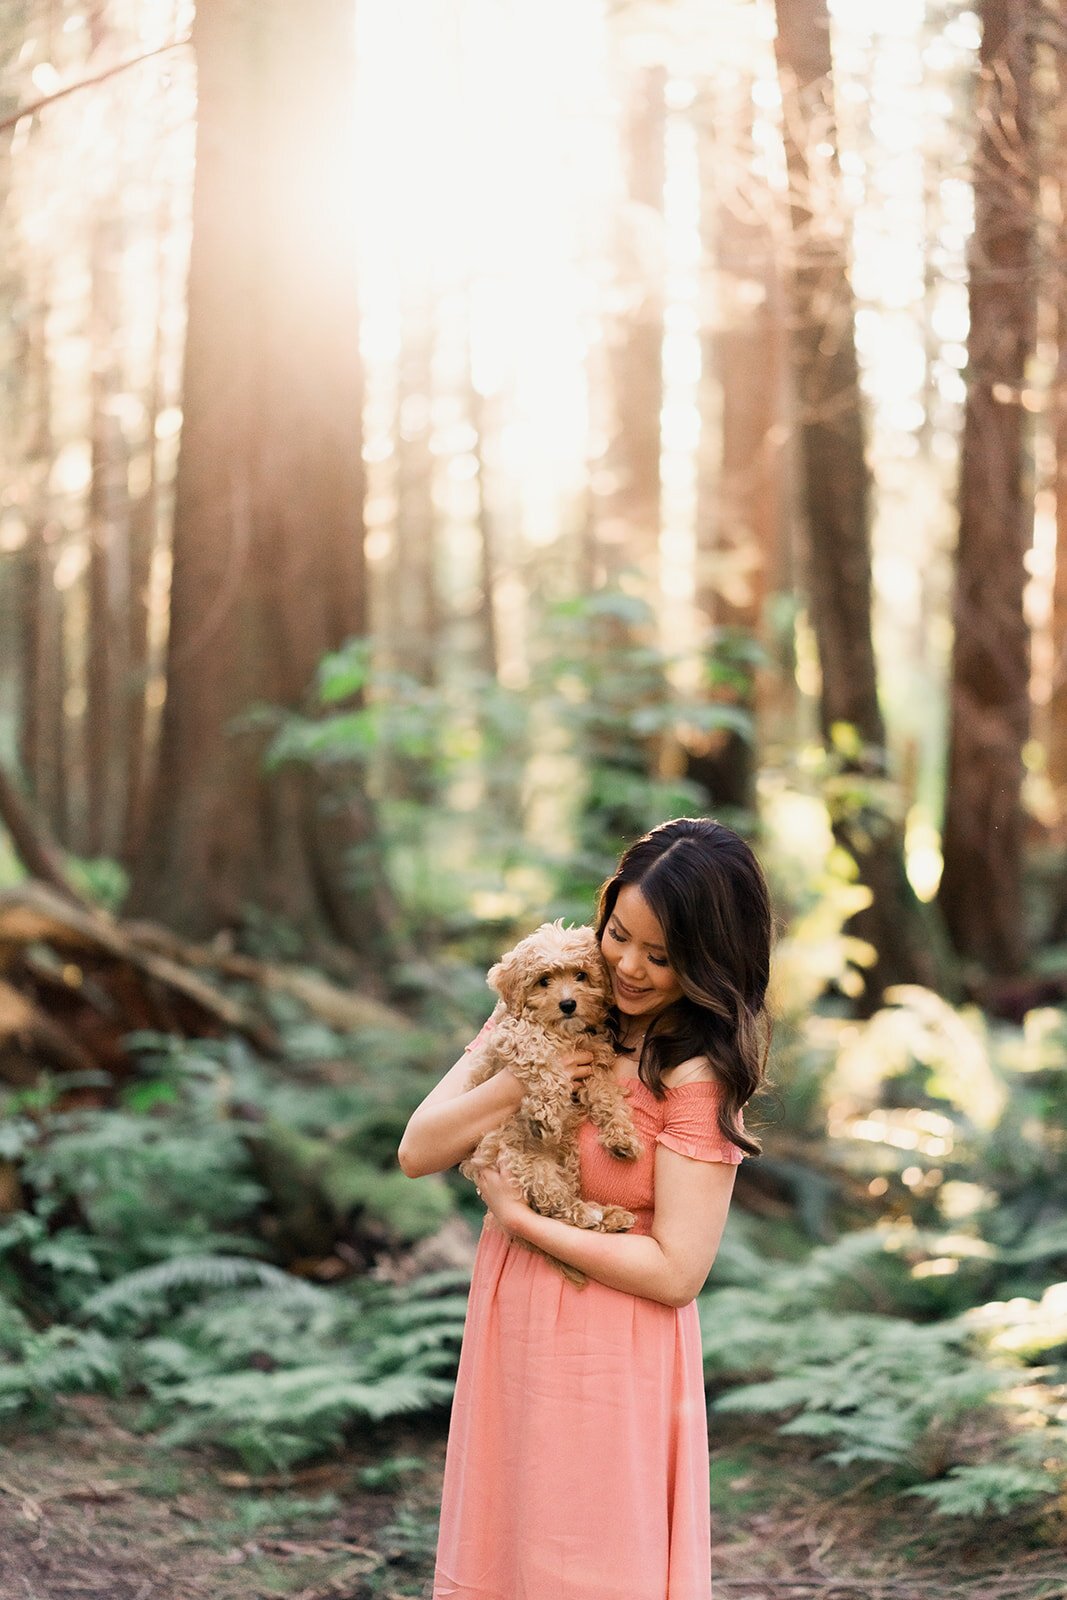 A woman in a soft pink linen dress snuggles her adorable, fluffy, baby puppy, while being backlit by a beautiful sunset.